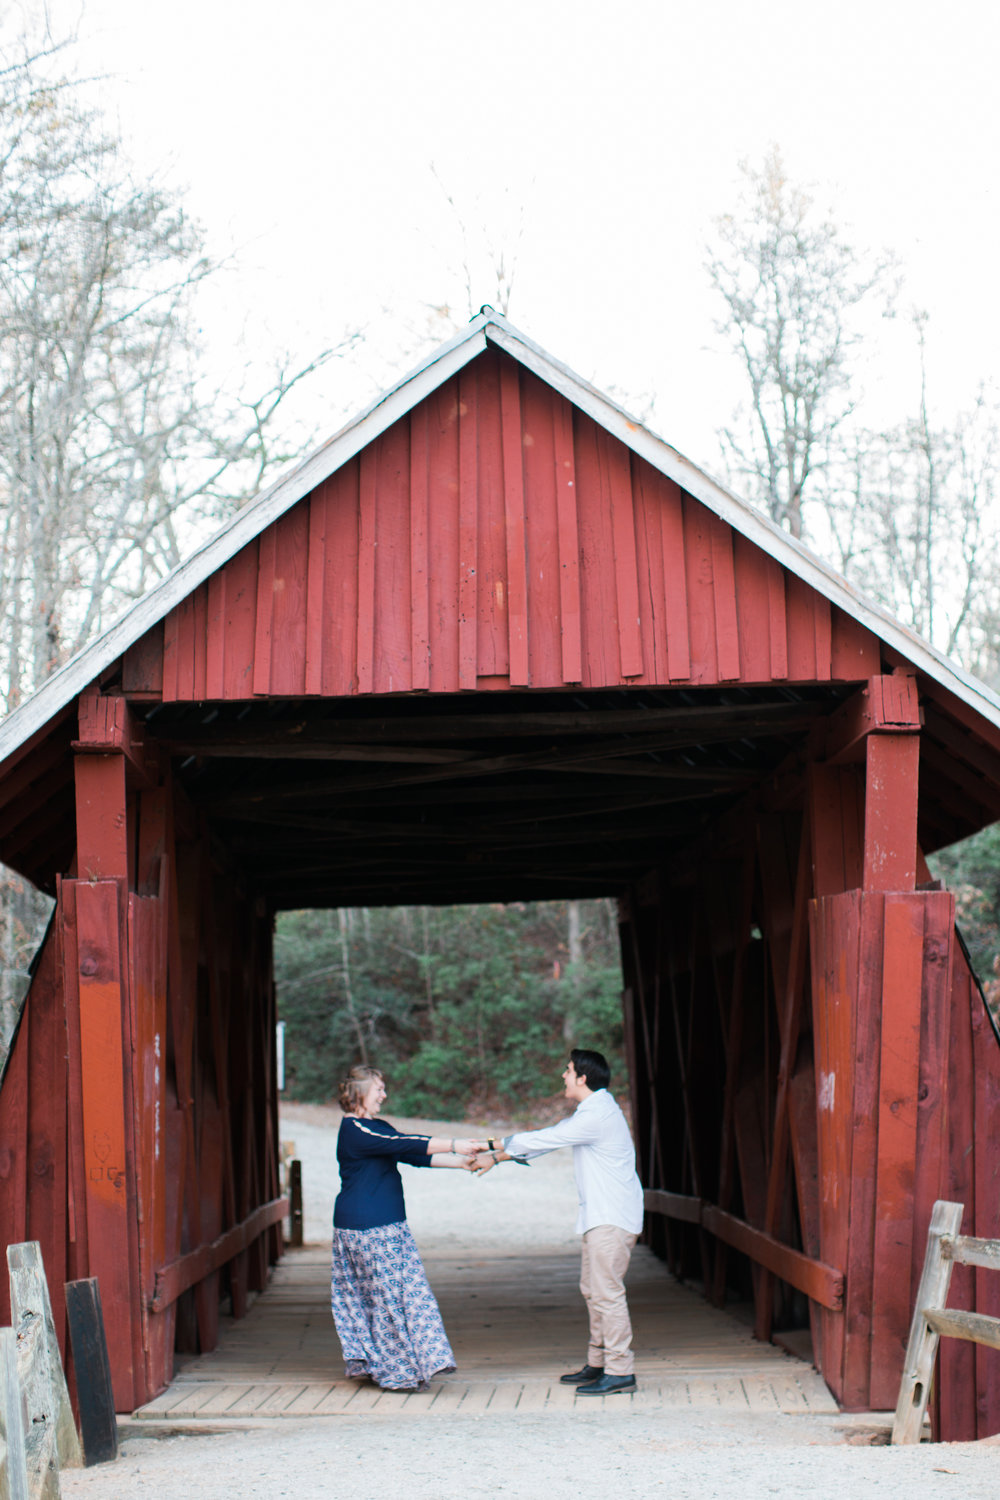 Dancing in the Covered Bridge